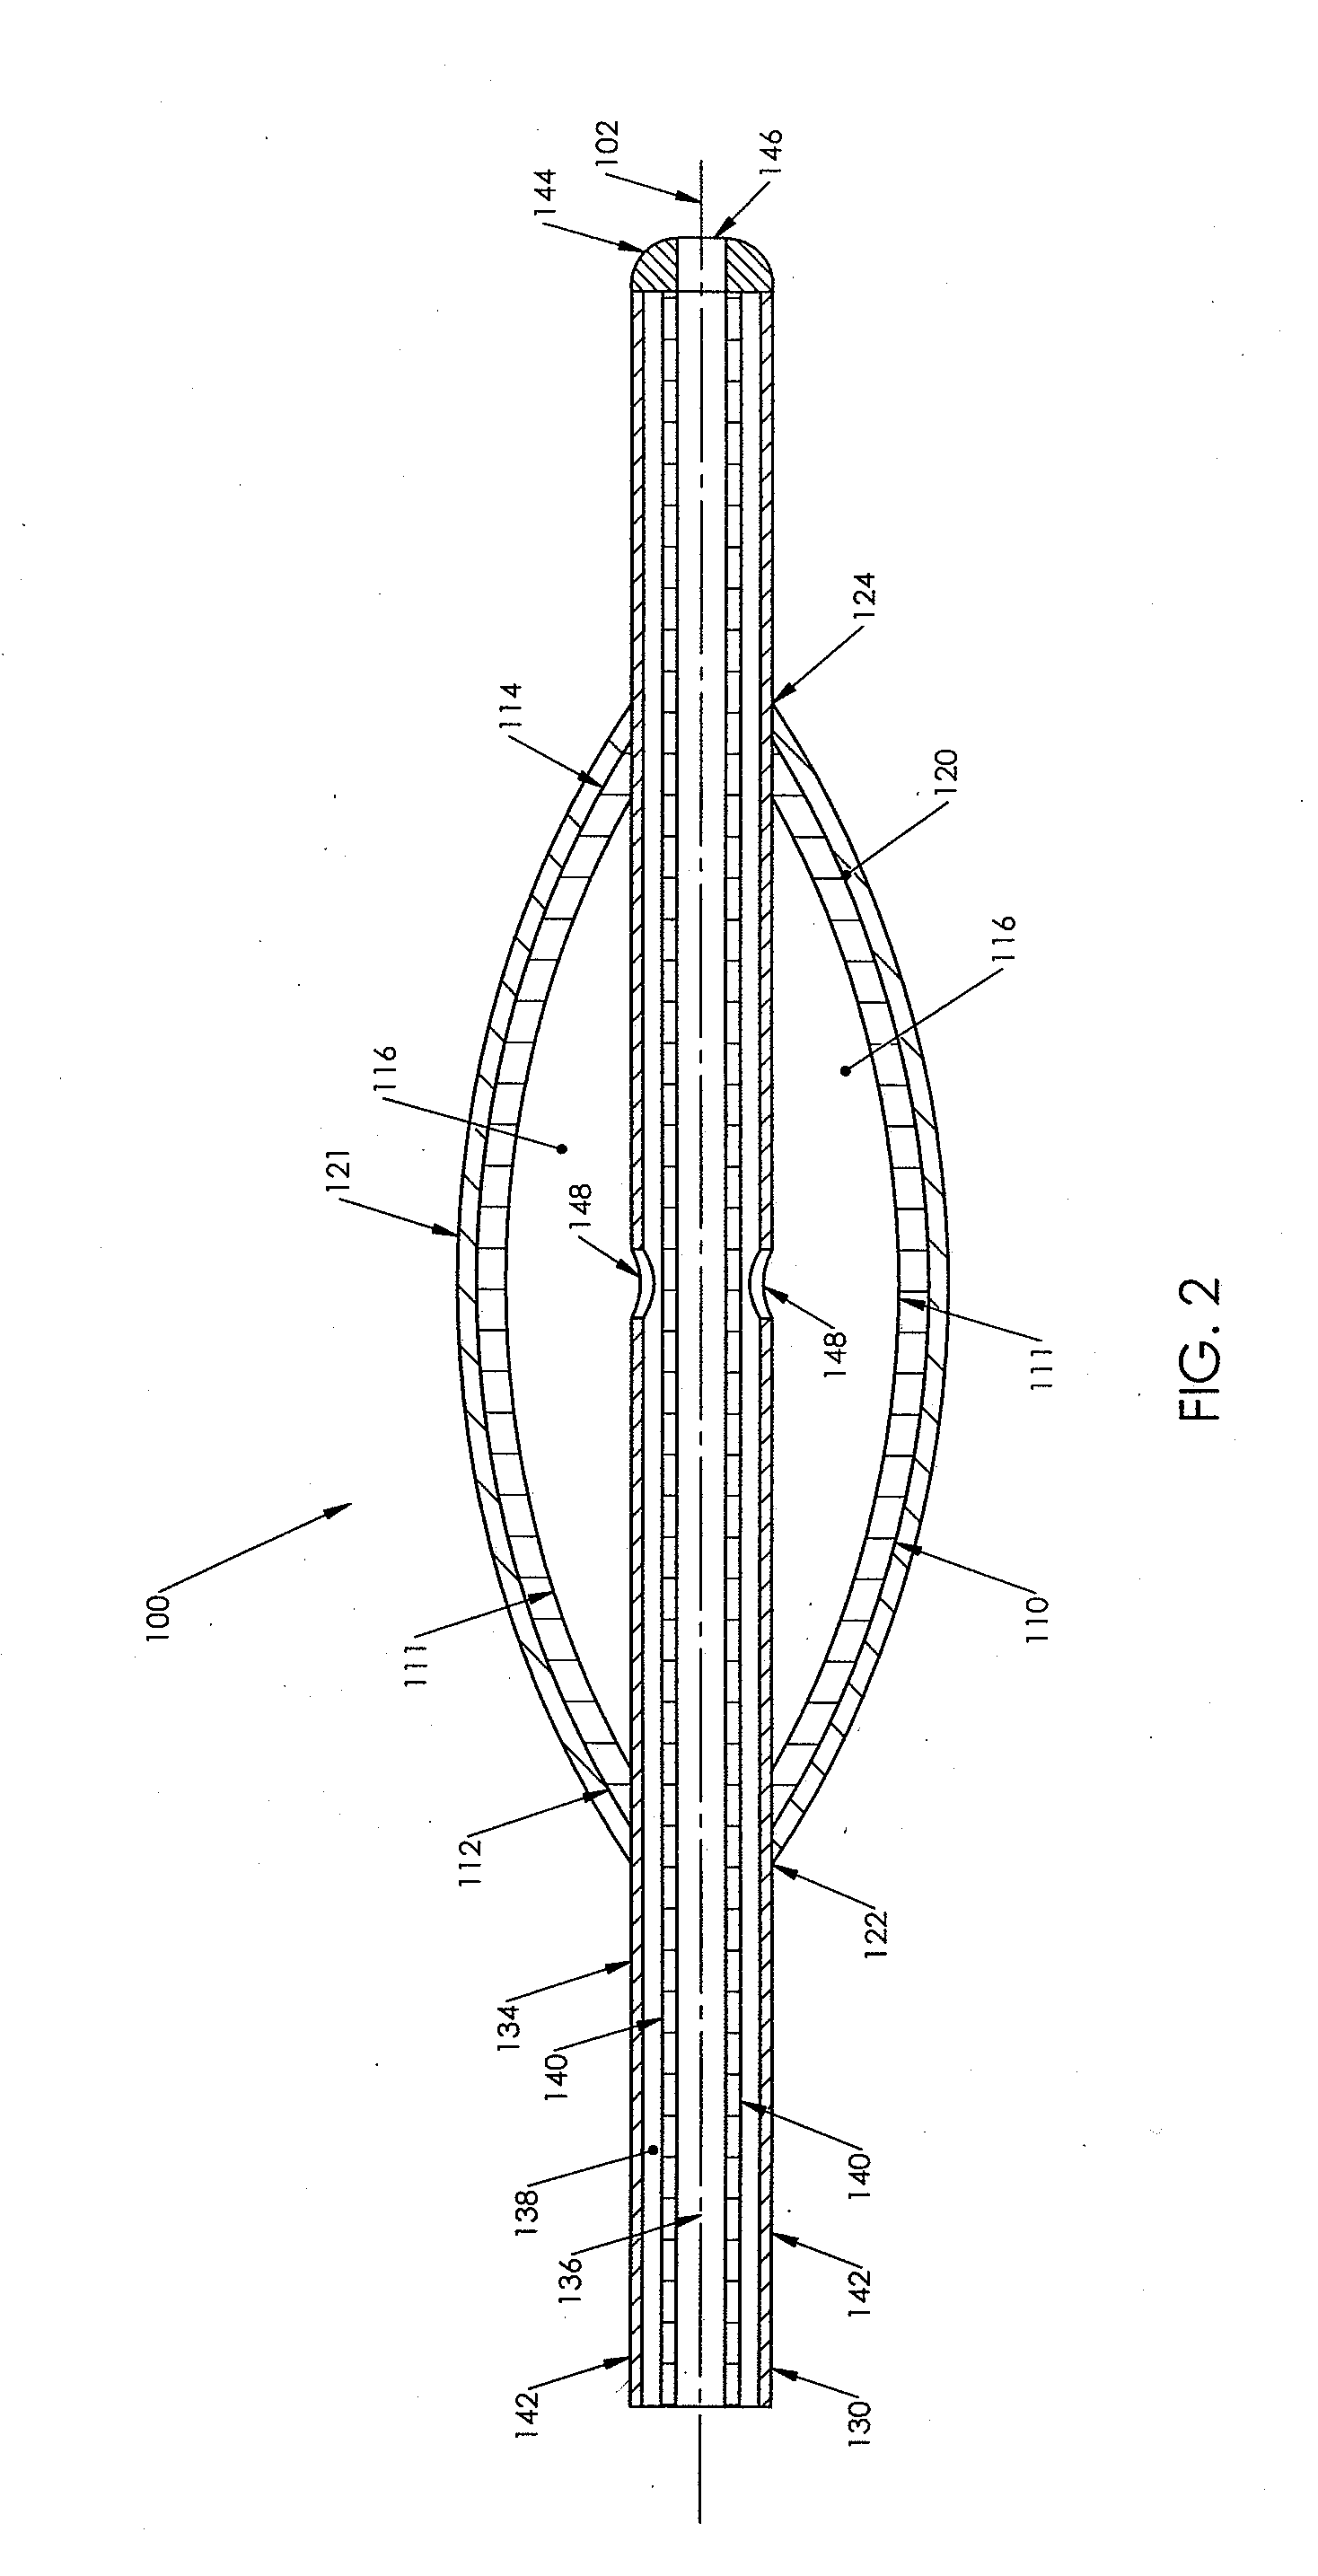 Method for Expanding a Vessel